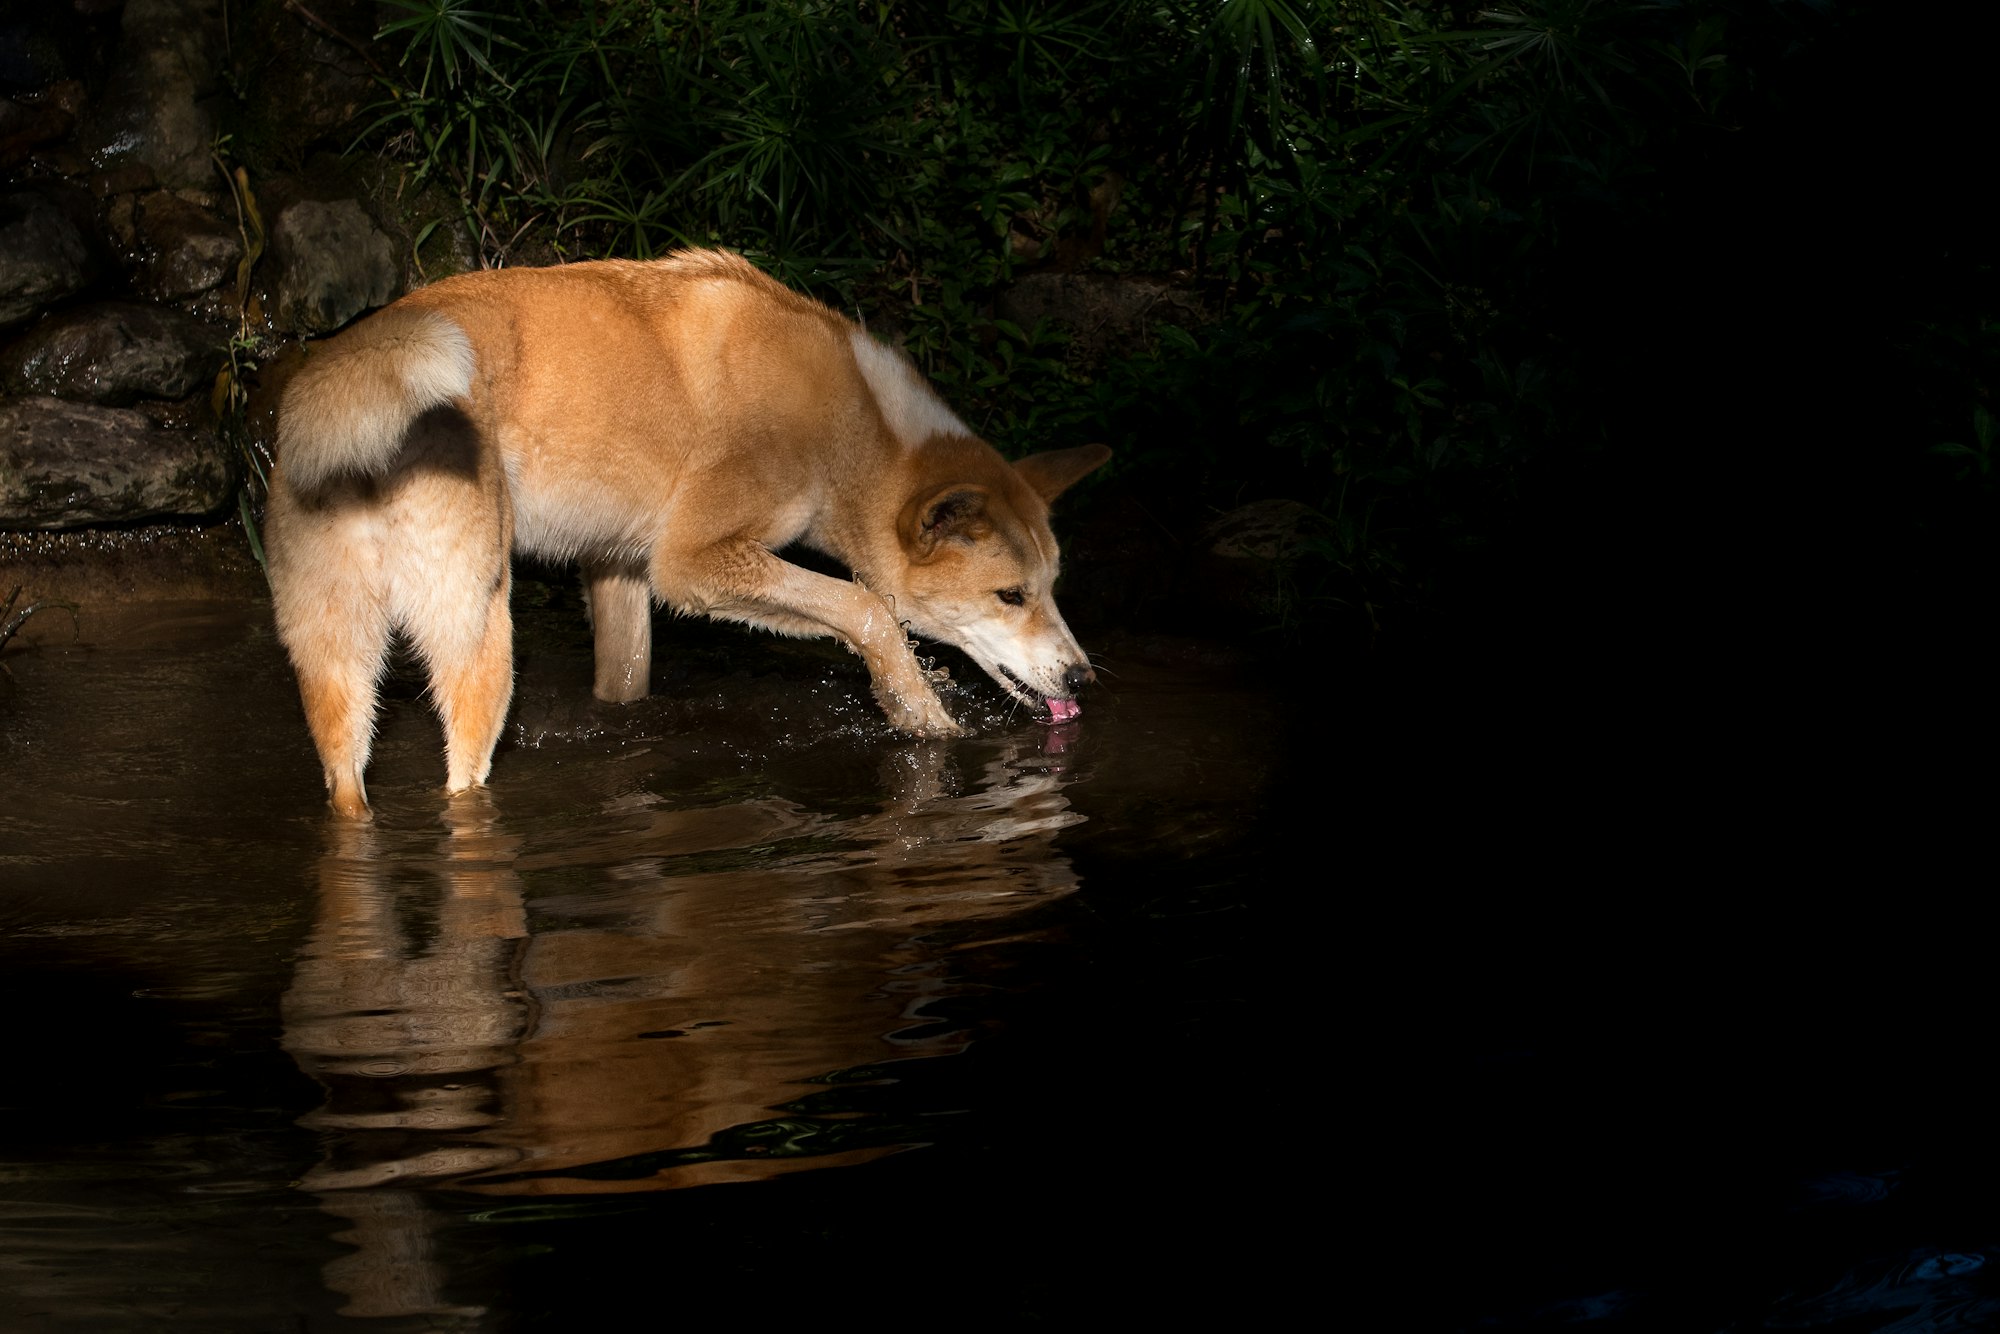 Australian Dingo. An Australian dingo enjoys a drink. Dingoes came to Australia thousands of years ago, probably brought by people from Indonesia, and are now considered to be Australian native animals. Some people keep them as pets.